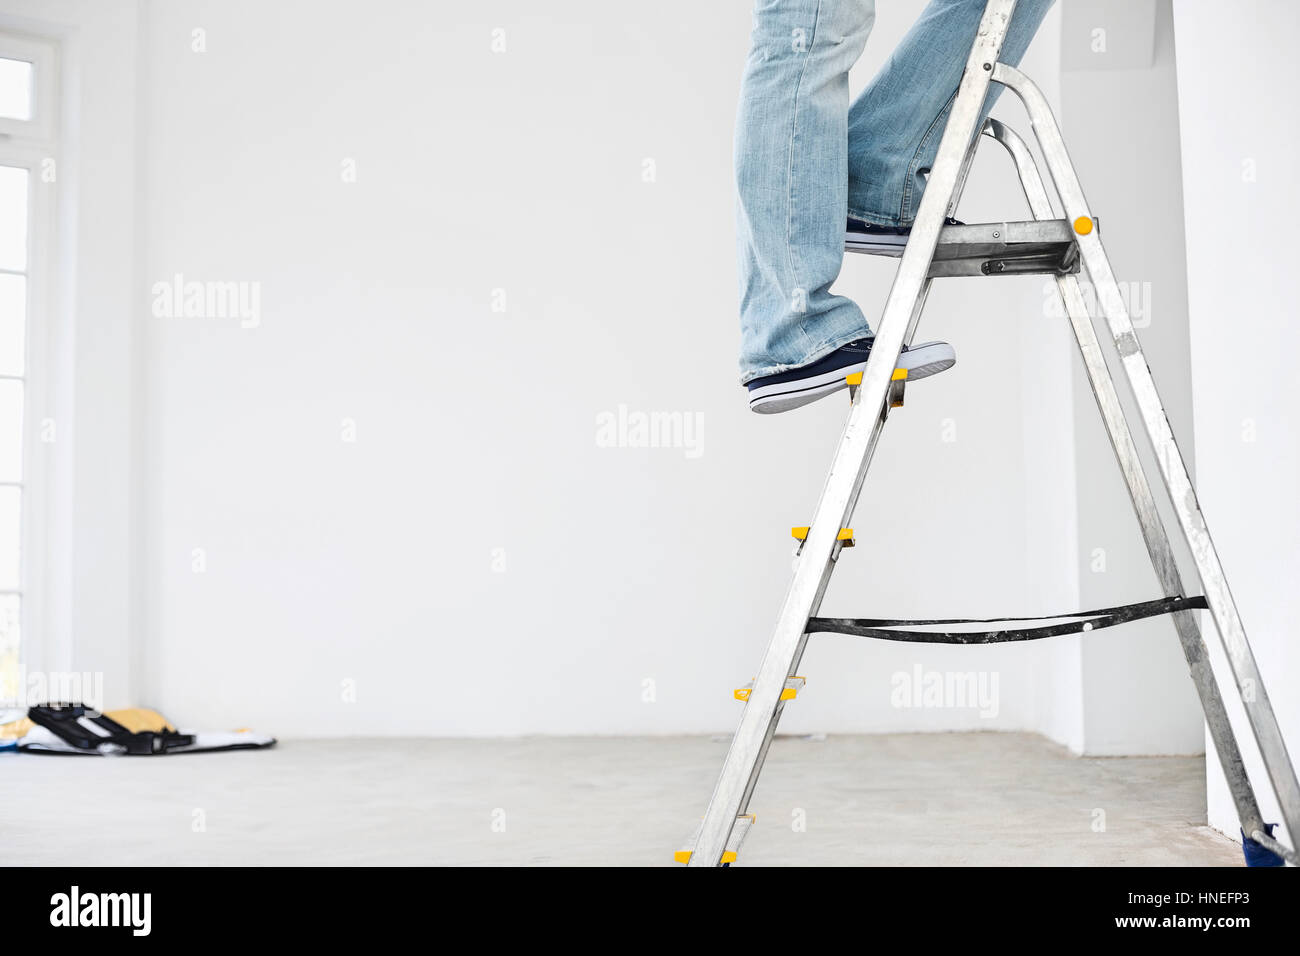 Low section of man on ladder Stock Photo